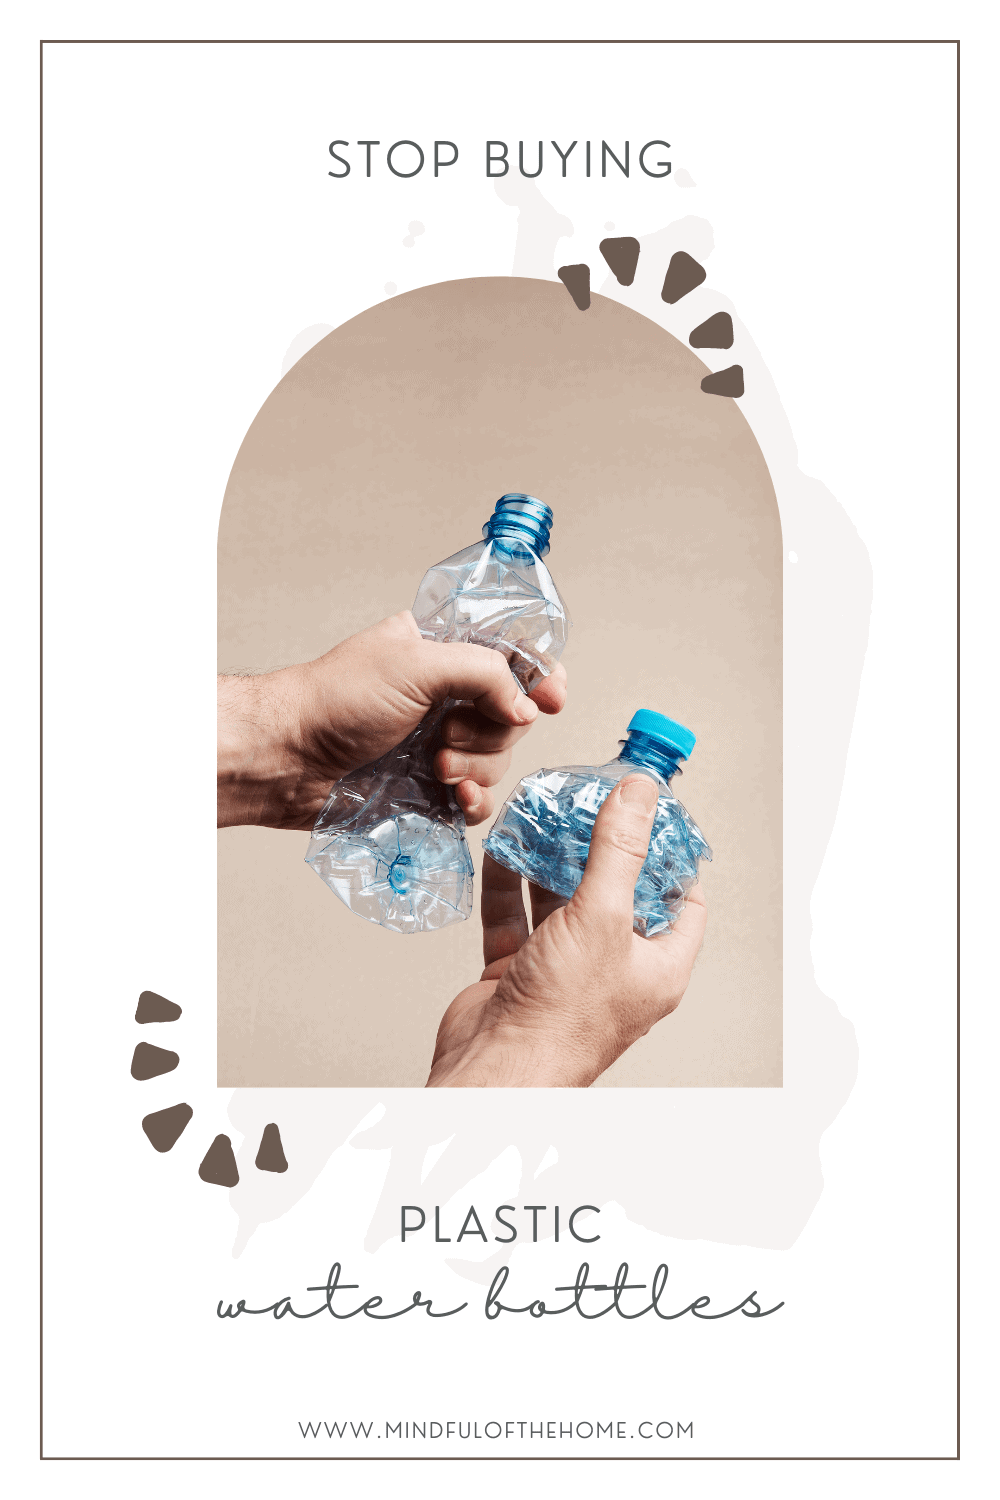 https://mindfulofthehome.com/wp-content/uploads/2019/08/stop-buying-plastic-water-bottles-1000x1500.png